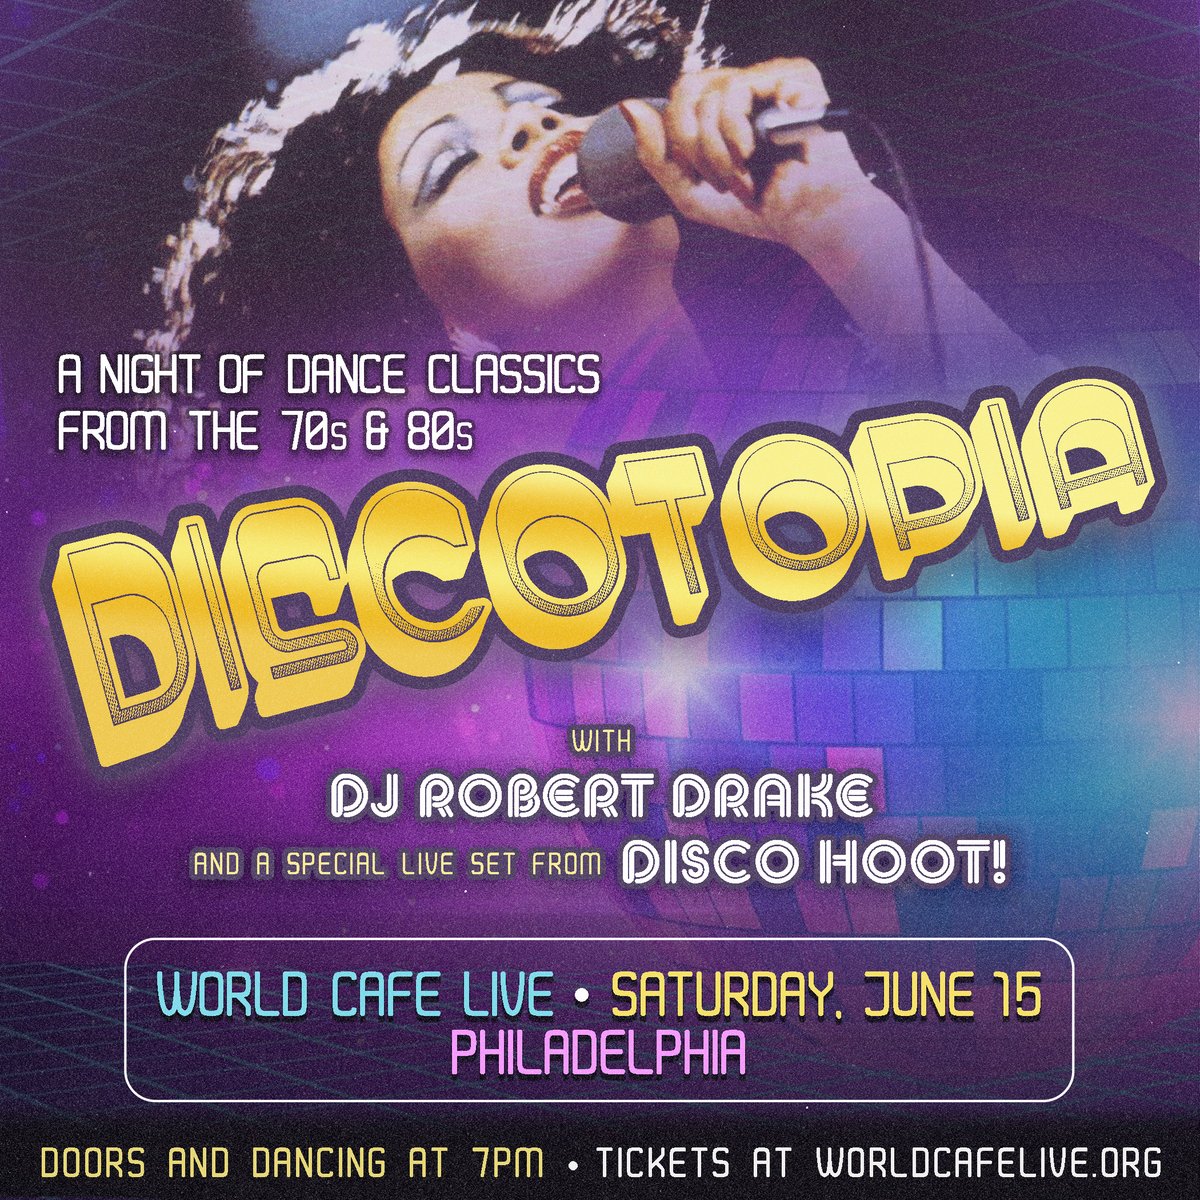 *Just Announced* @DJRobertDrake + Disco Hoot! return to WCL with a special summer edition of Discotopia, this time spotlighting the queen of Disco, Miss Donna Summer 🪩 Get ready to shake your groove thang on Saturday, June 15 🕺Tix go on sale 12pm Friday: tinyurl.com/z6a4d7t9